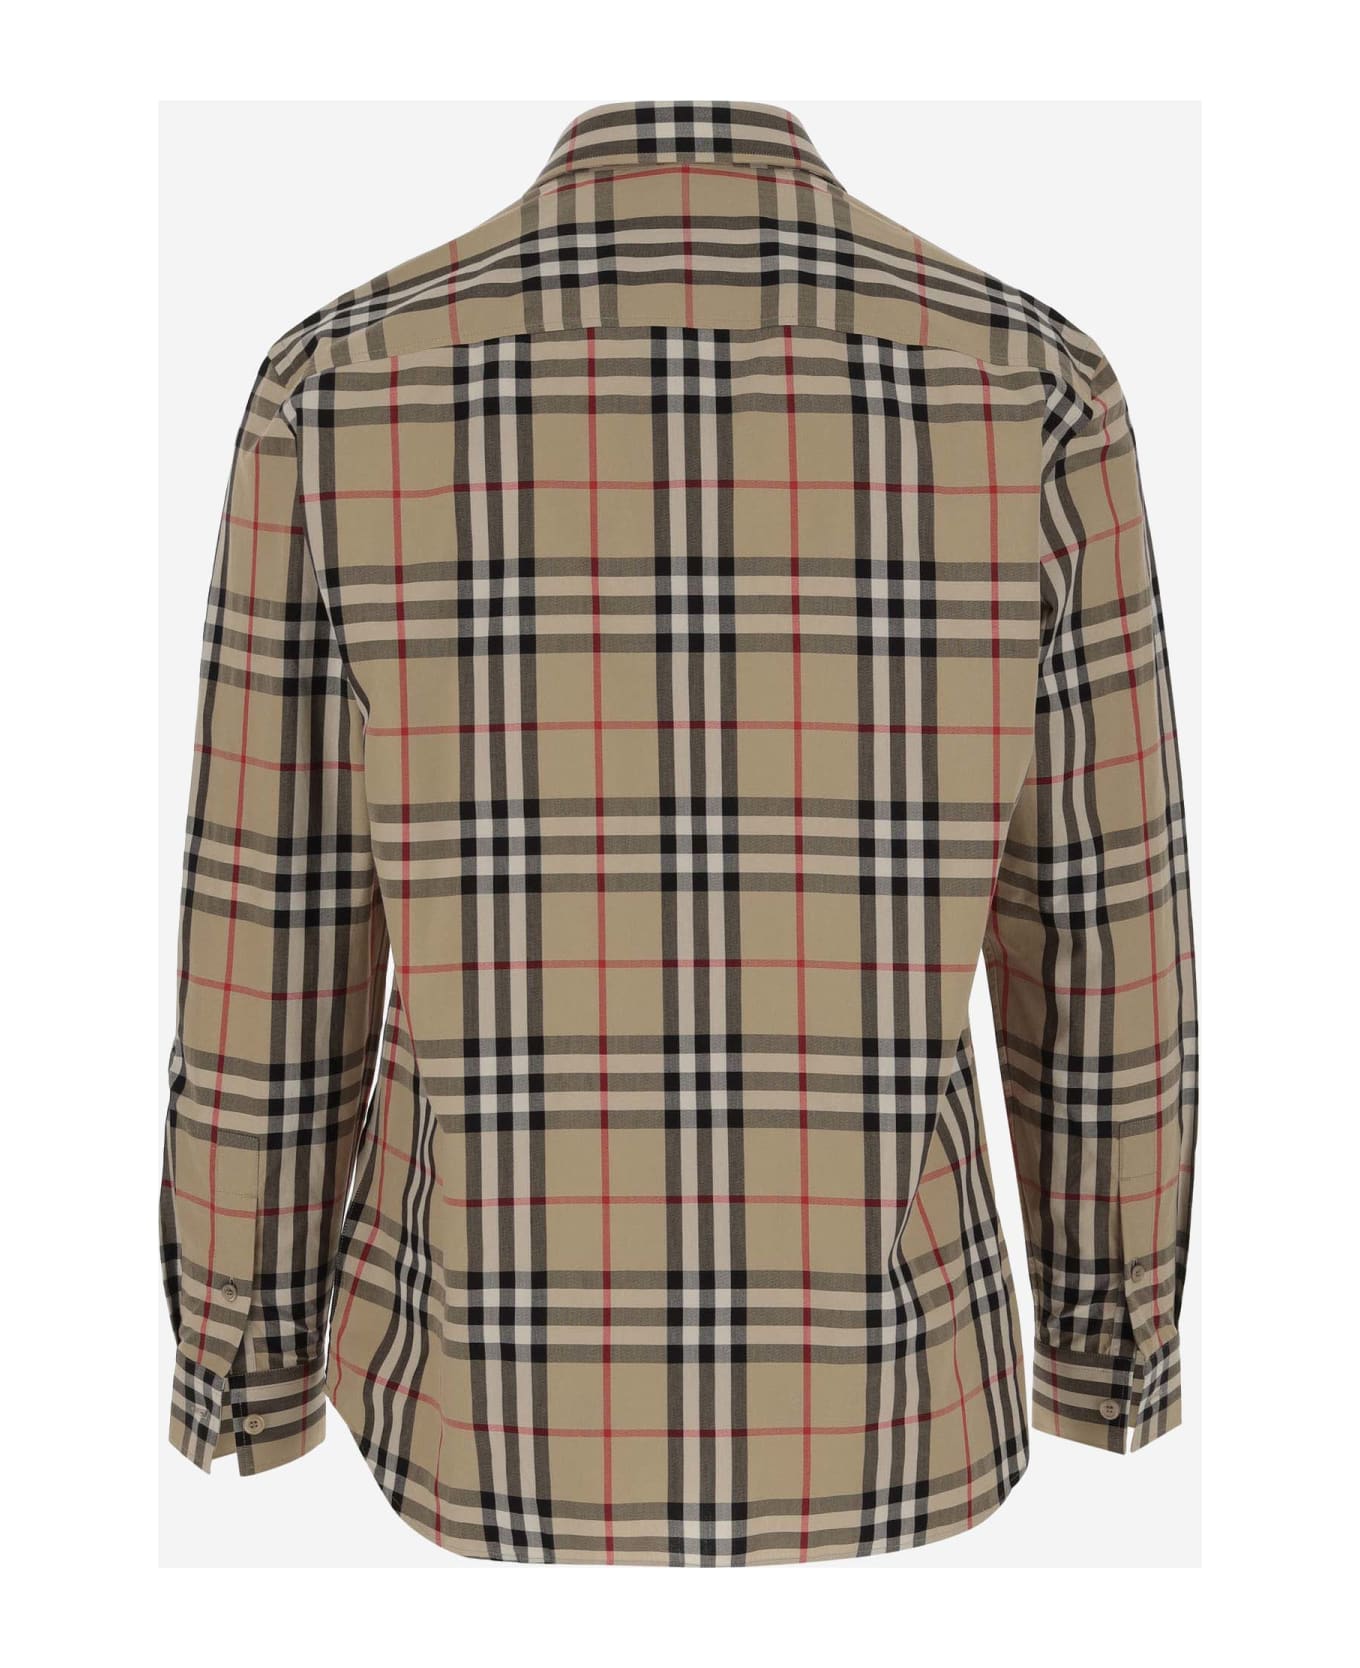 Burberry Cotton Poplin Shirt With Check Pattern - Red